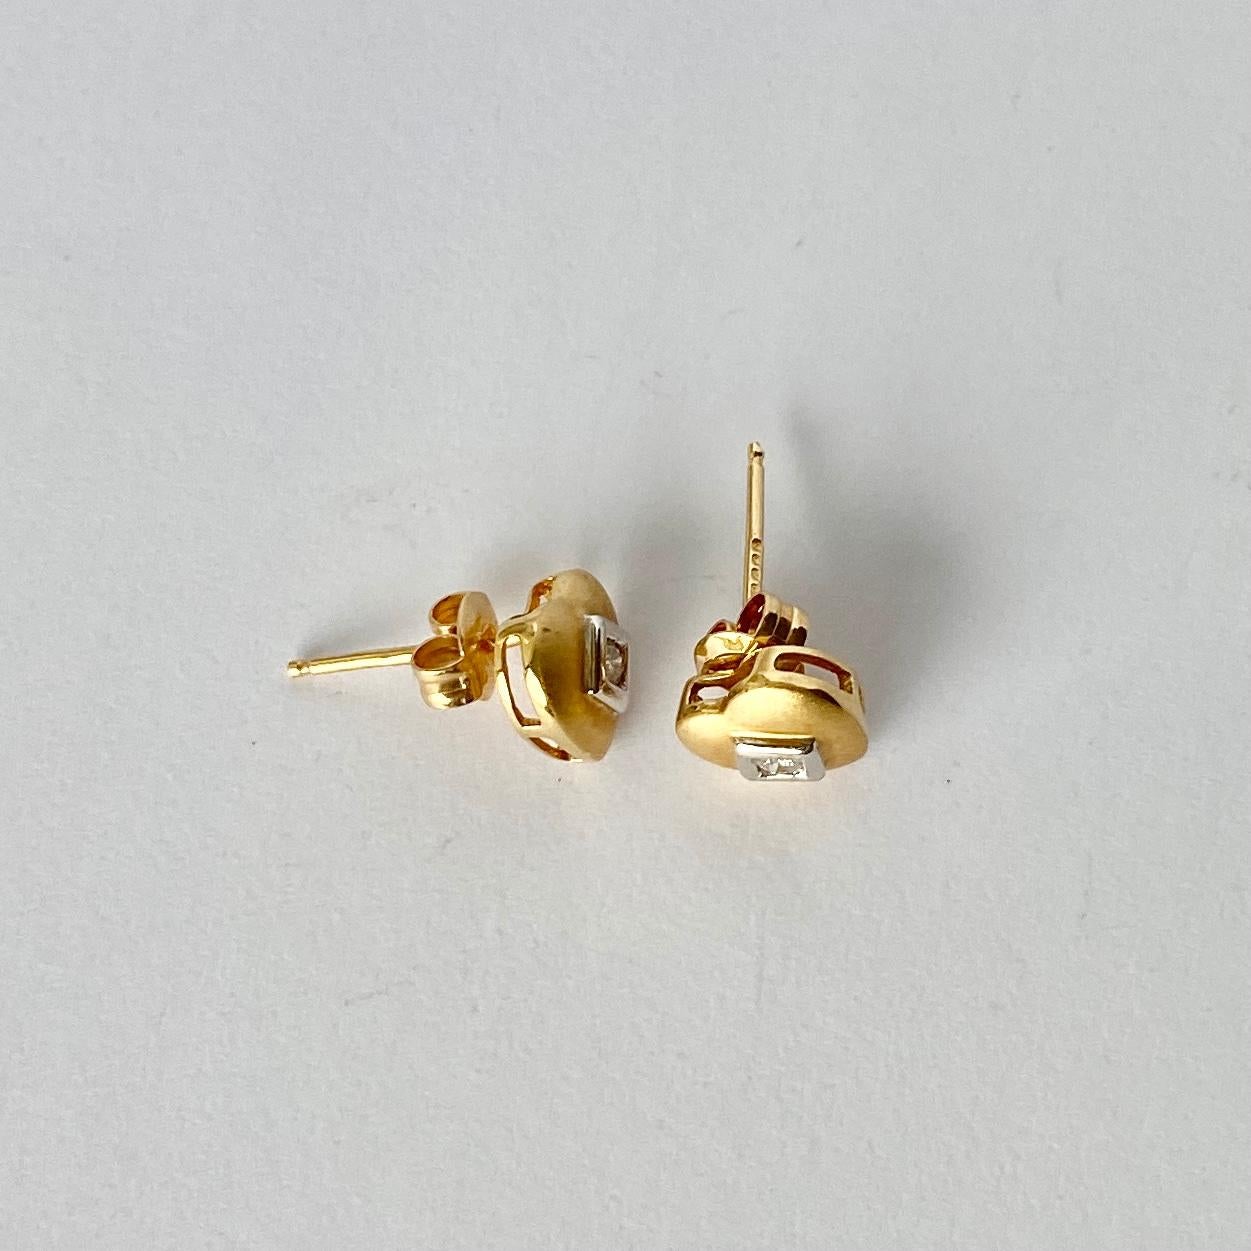 These gorgeous earrings are modelled in matte 18carat gold and each hold a sparkling diamond measuring 5pts each. The stones are set in white gold square settings. 

Dimensions: 8x8mm 

Weight: 1.9g